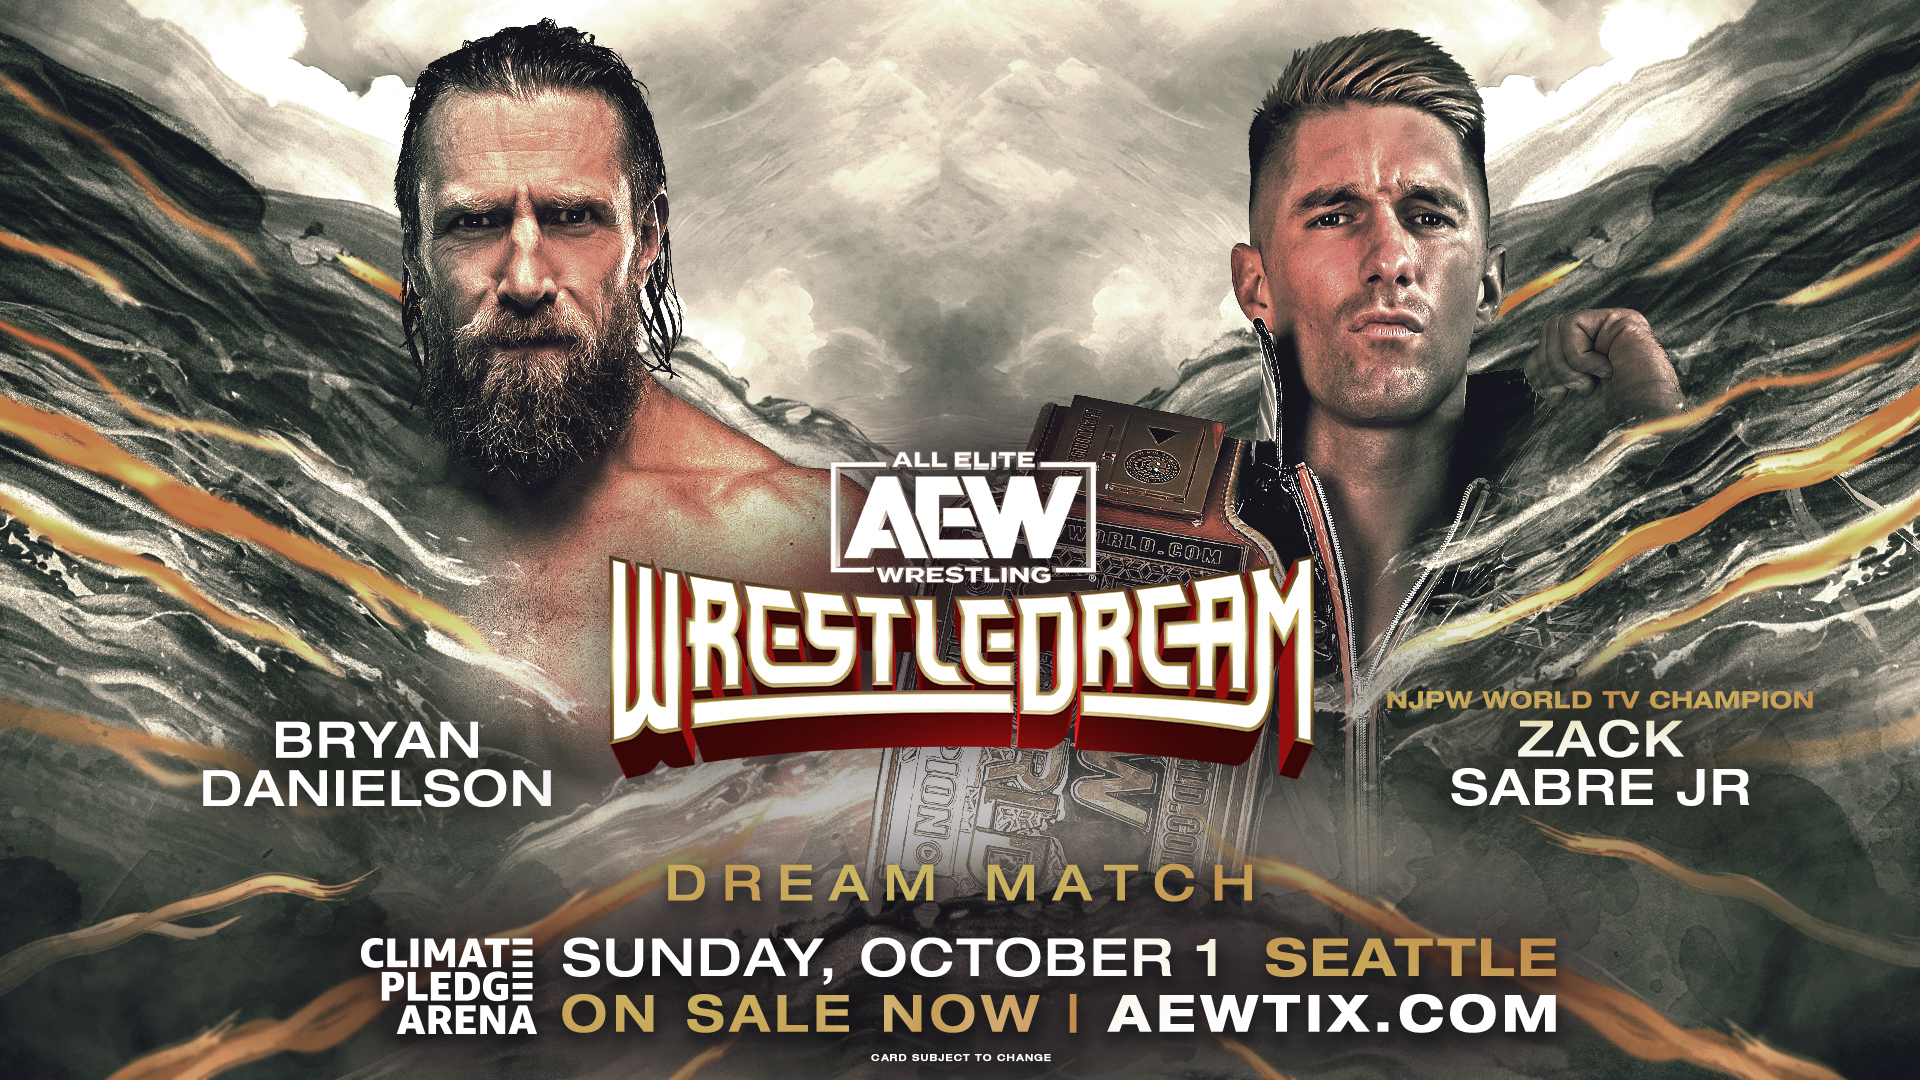 AEW WrestleDream promotional material featuring Bryan Danielson and Zack Sabre Jr.